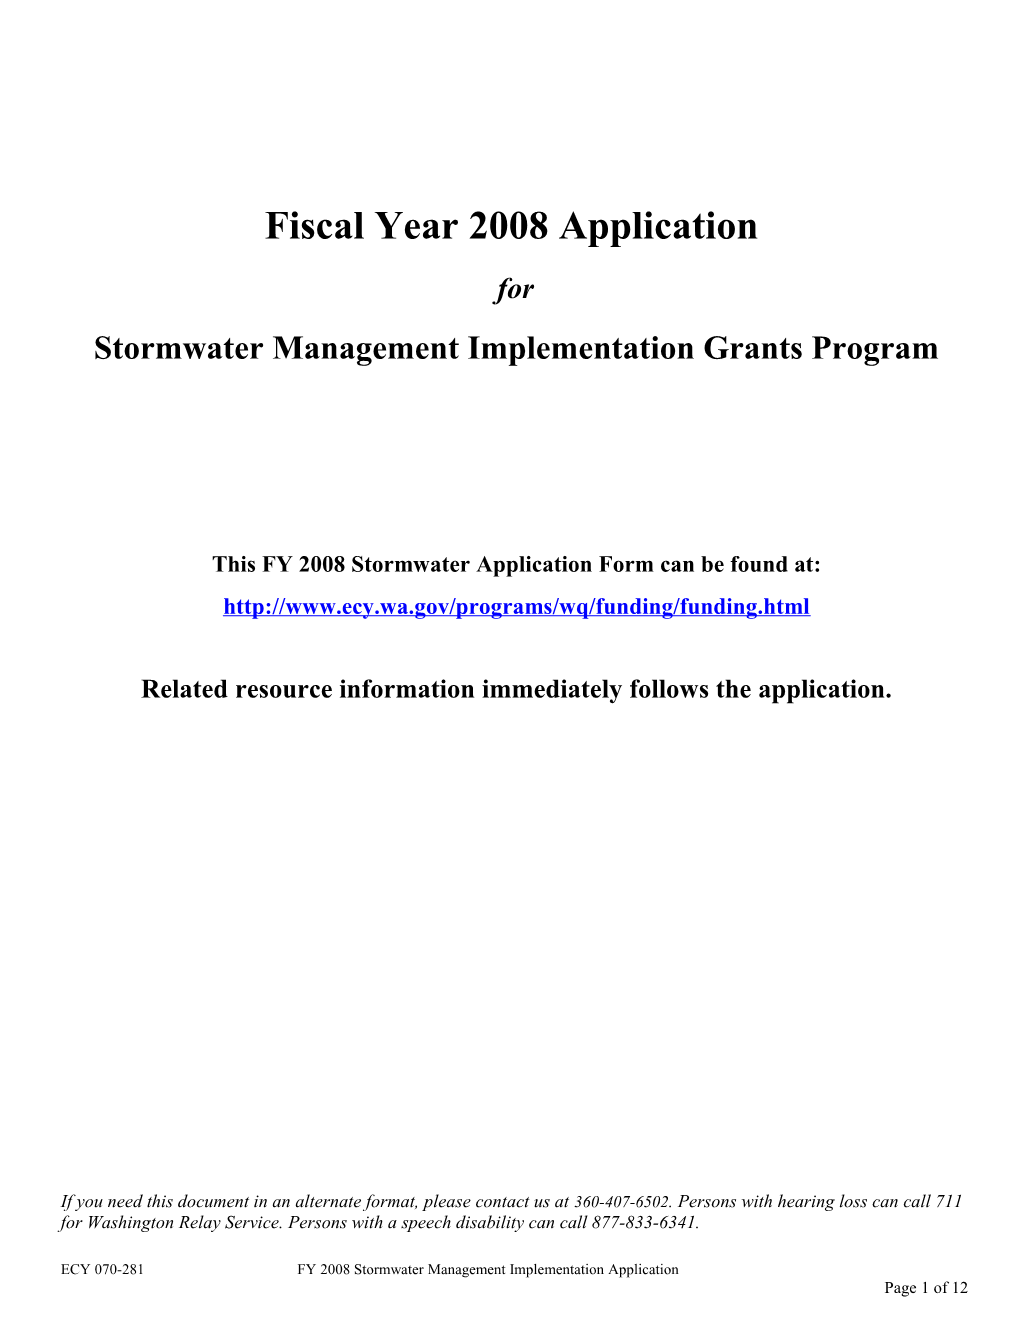 Water Quality Funding Programs 2002 Loan/Grant Application Form - Part 2